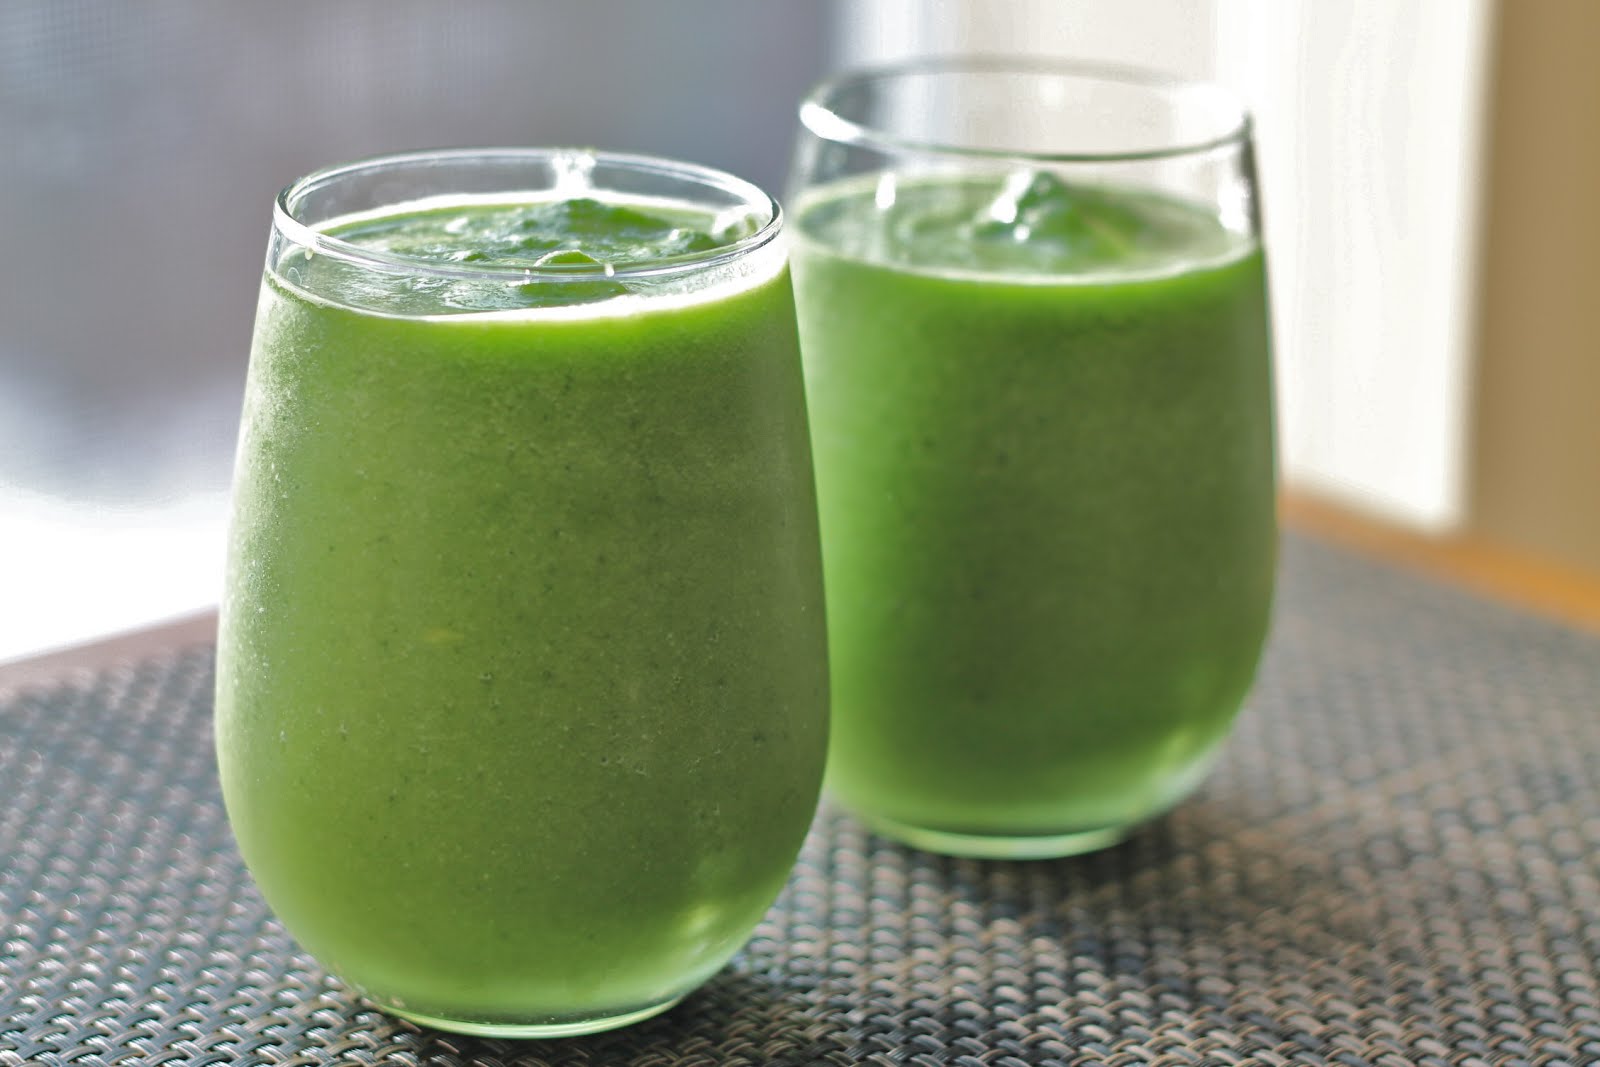 The first step in getting rid of cellulite: a green smoothie (Photo: Food Matters)